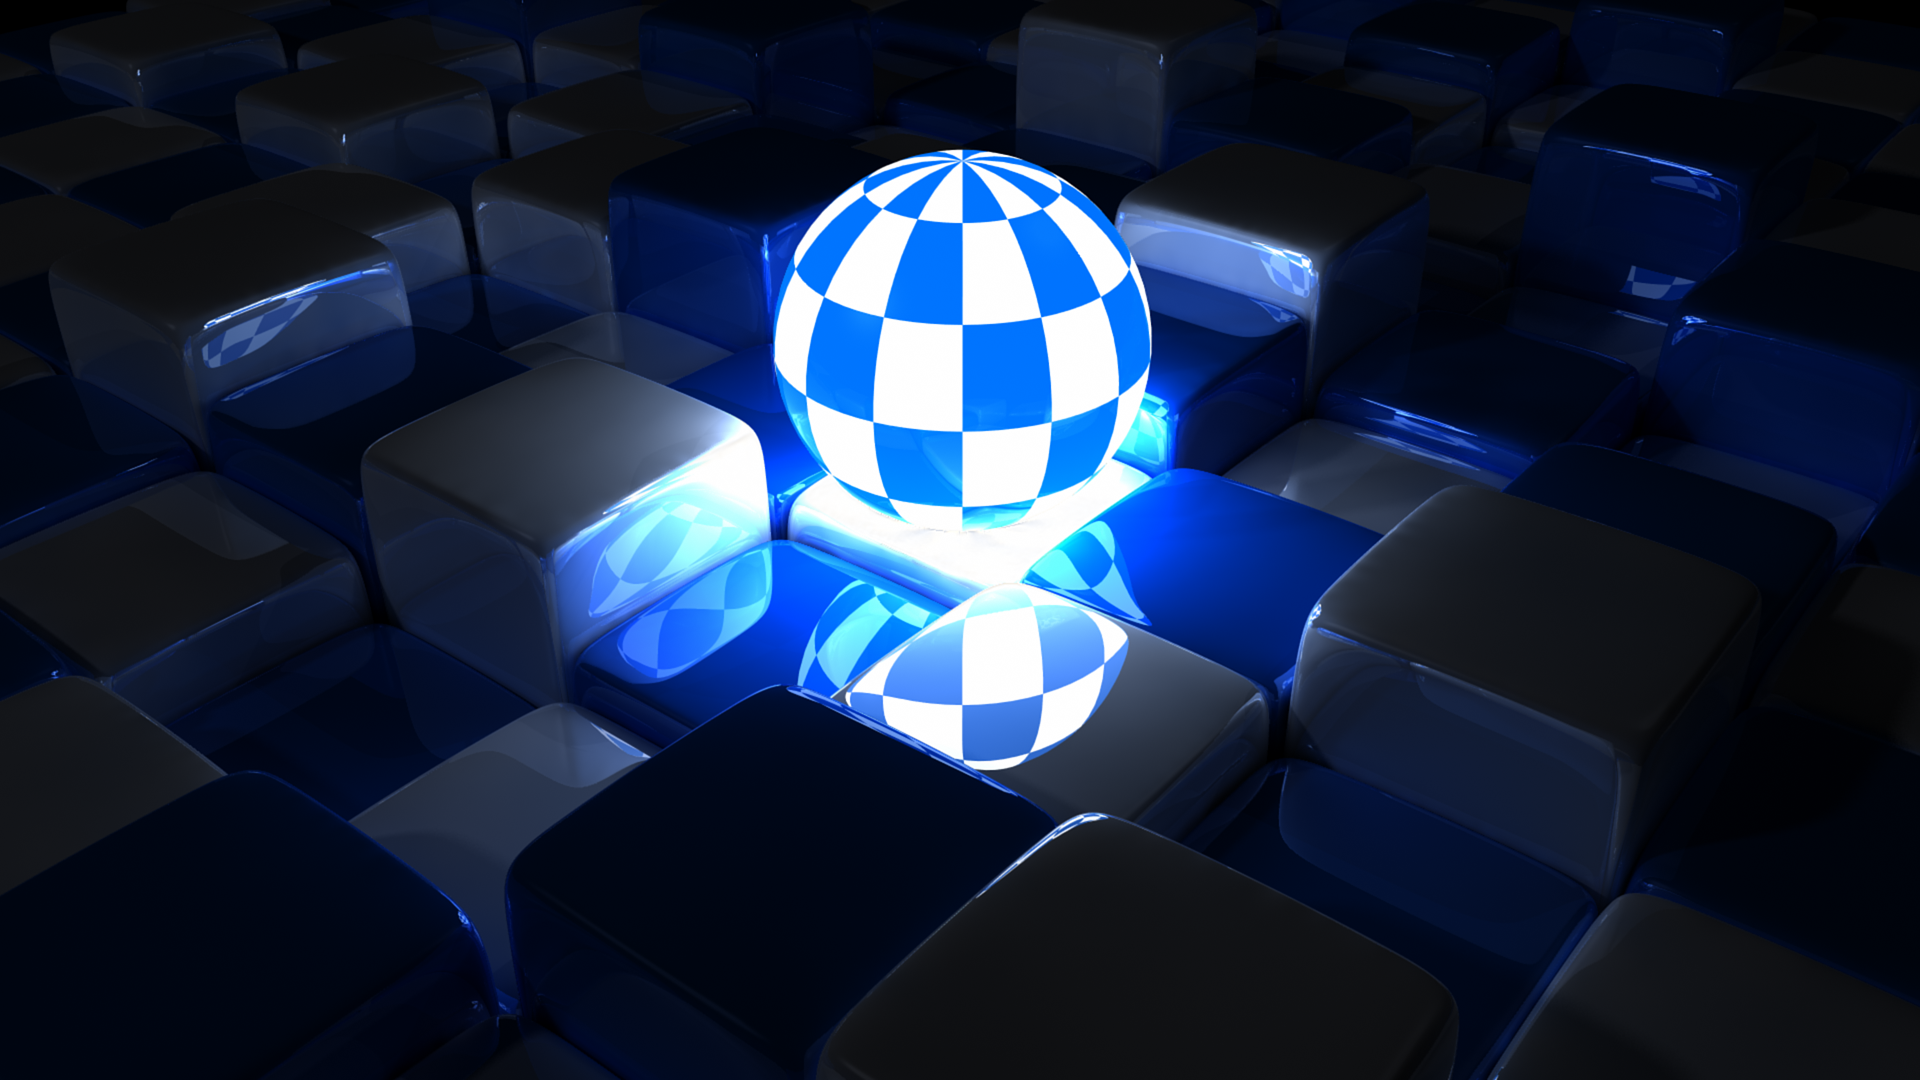 Luminous sphere among cubes wallpapers and images - wallpapers ...